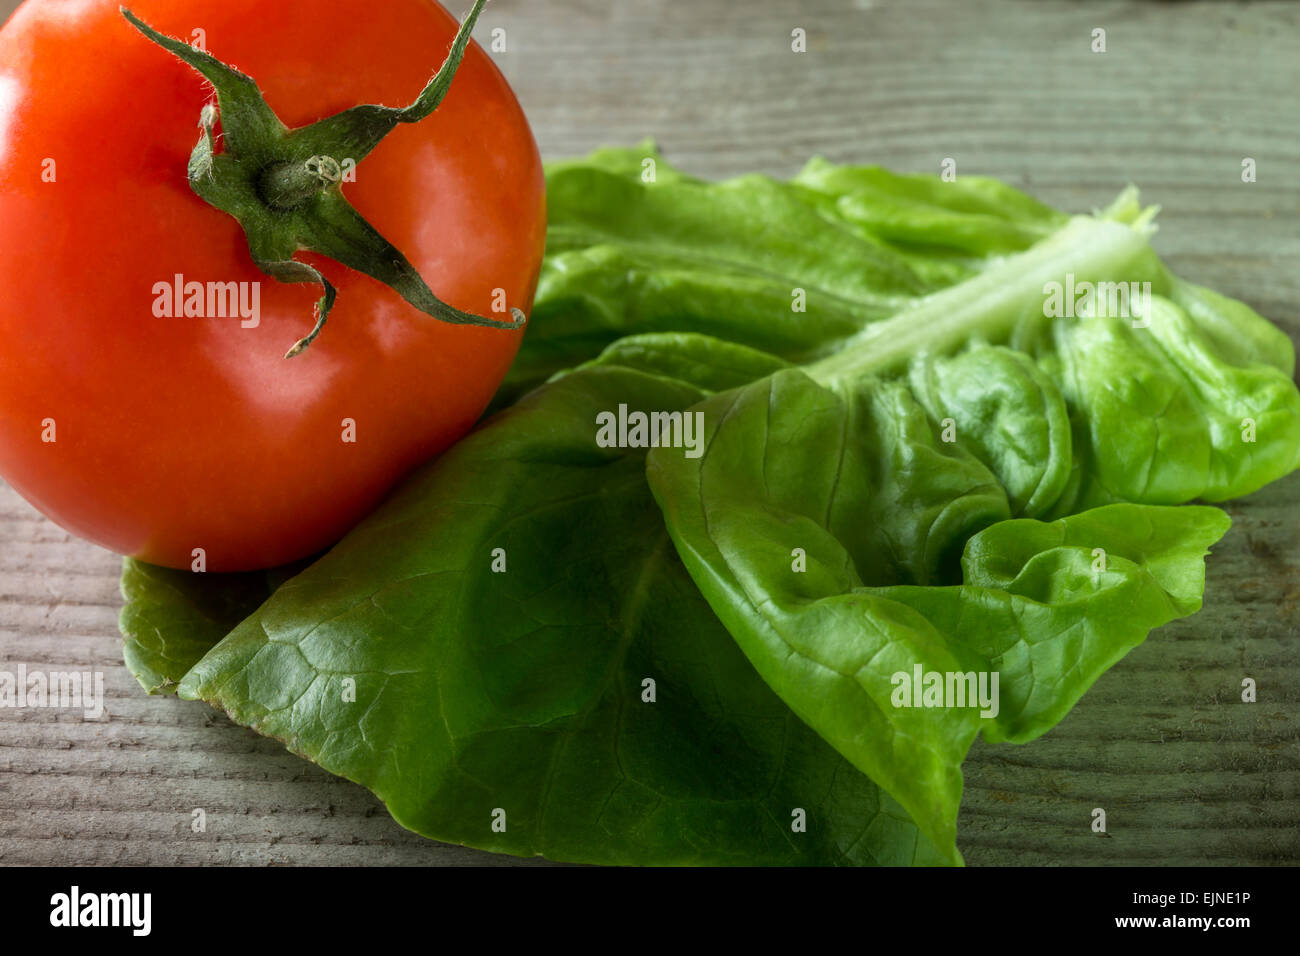 Close up shot of green salad and tomato over wooden background Stock Photo